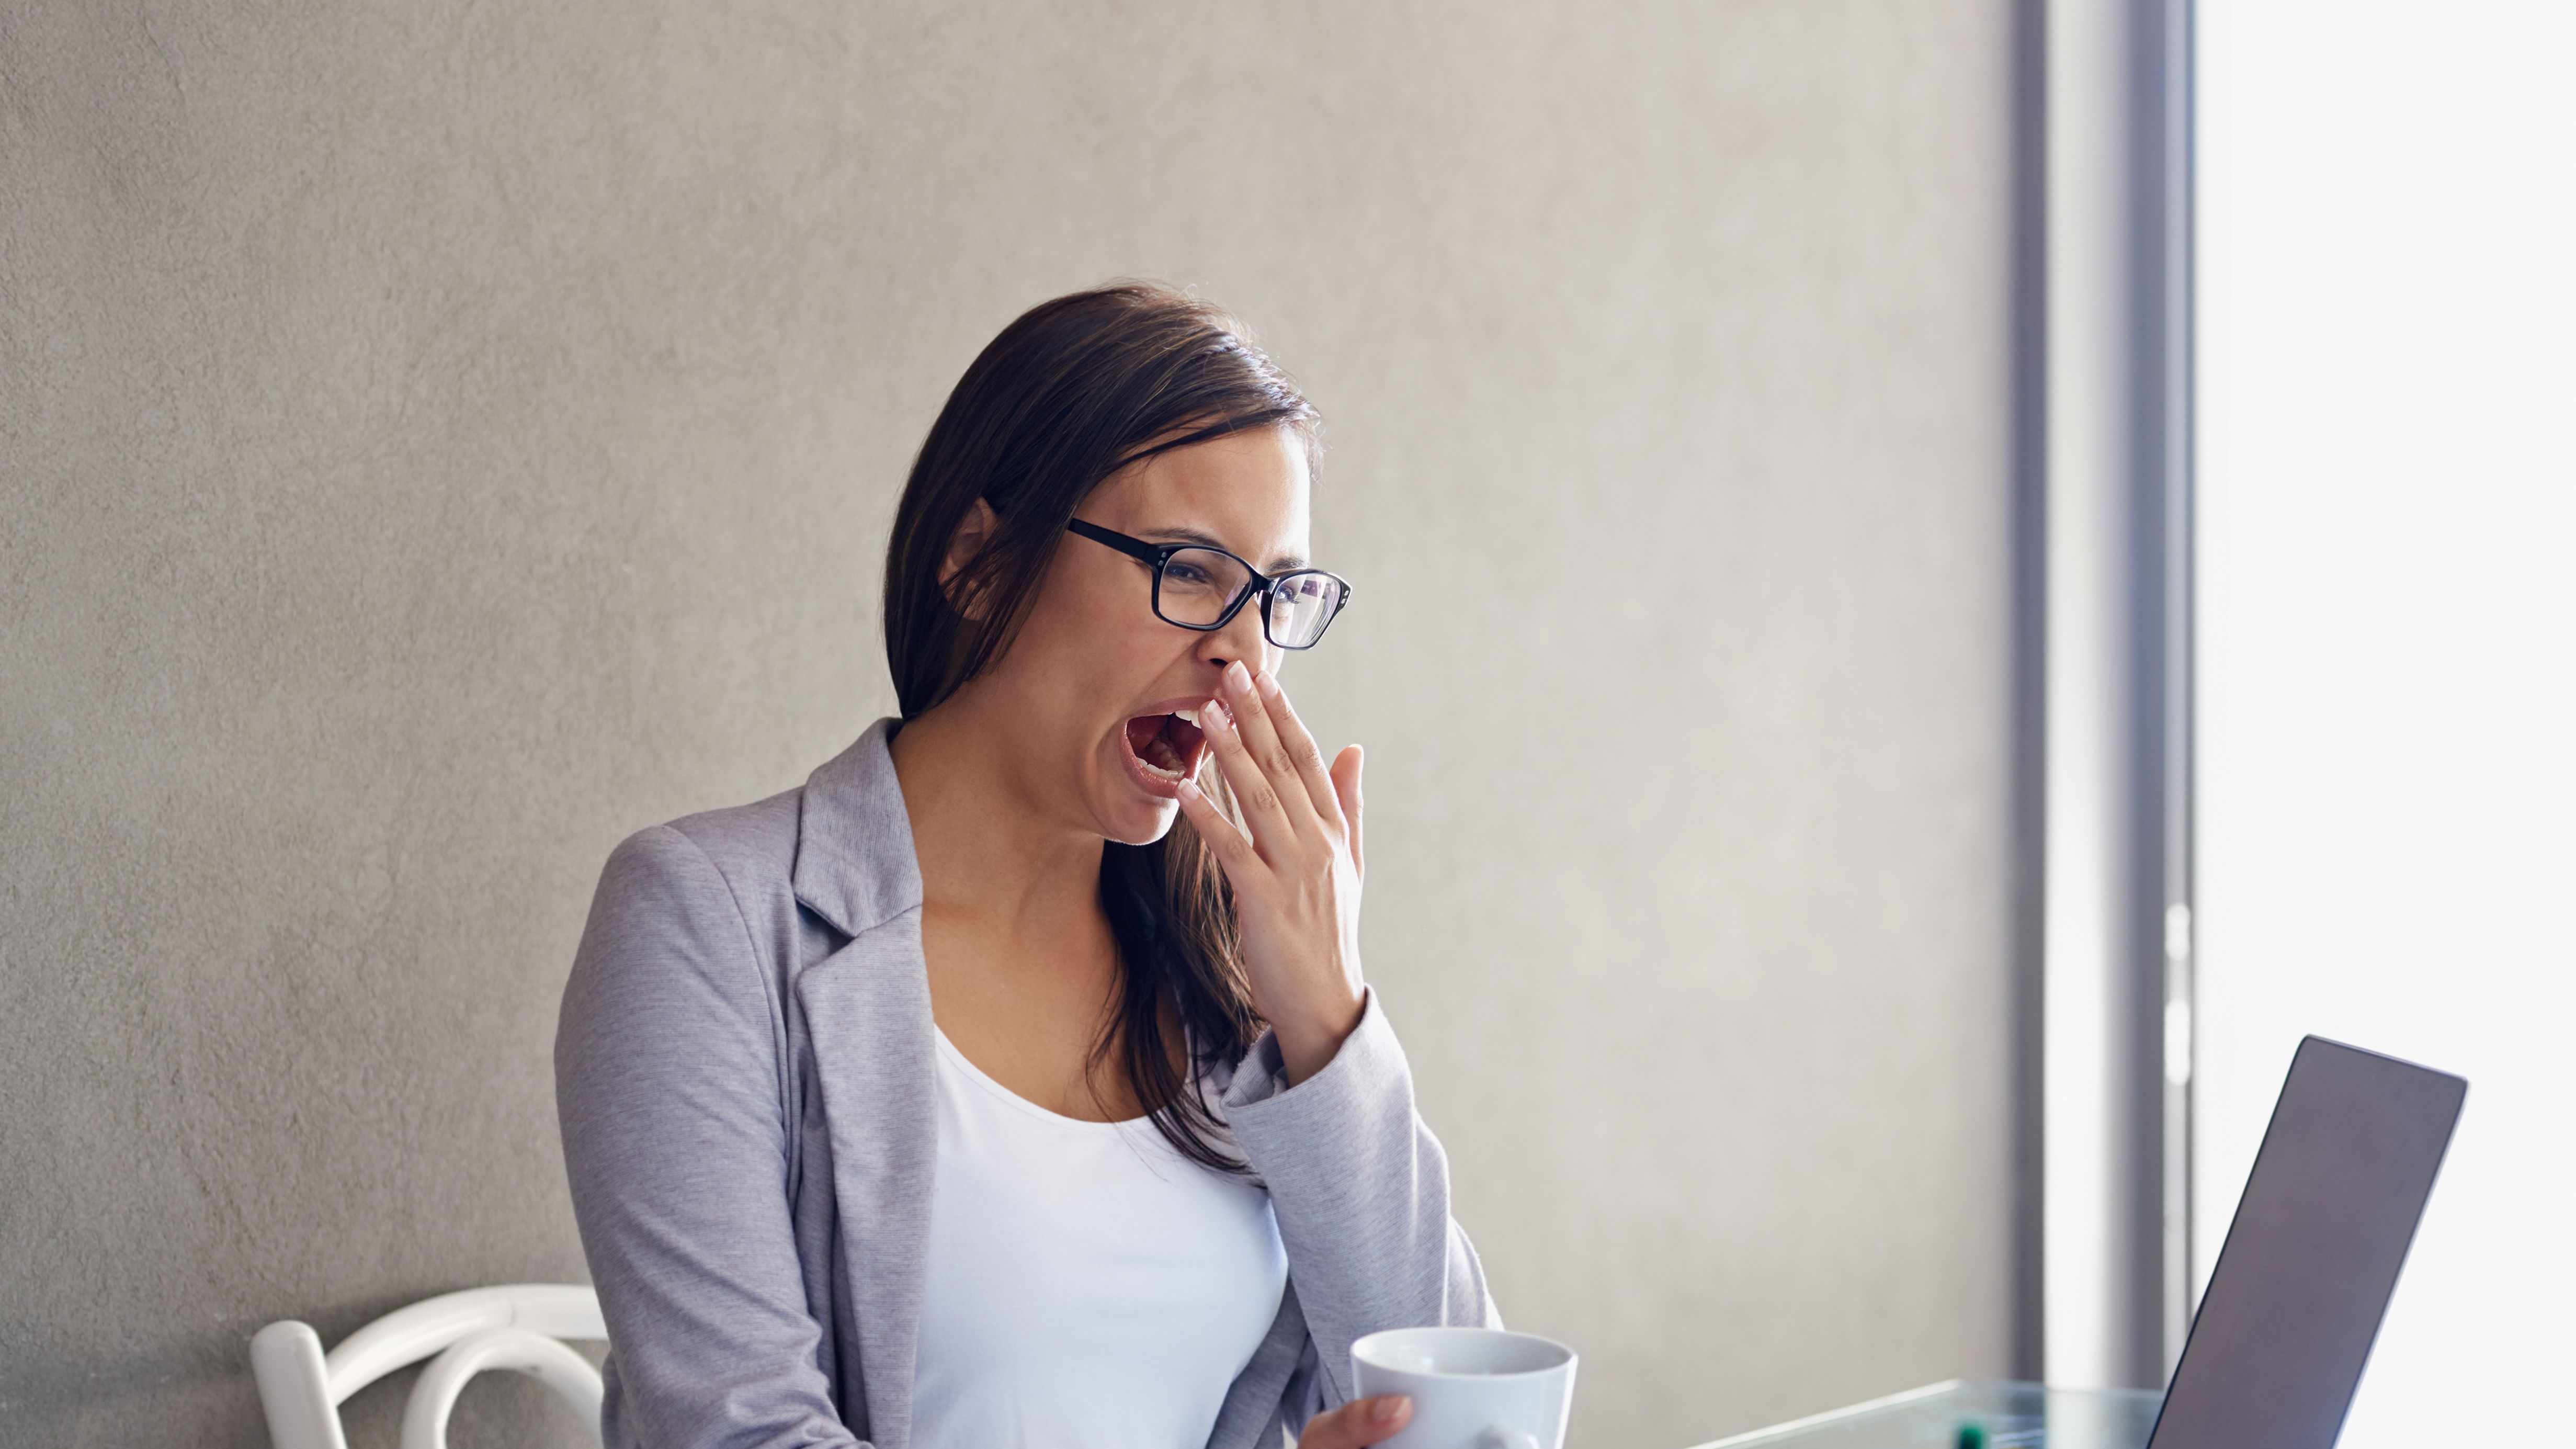 These 3 moves will make you stop feeling sleepy at work